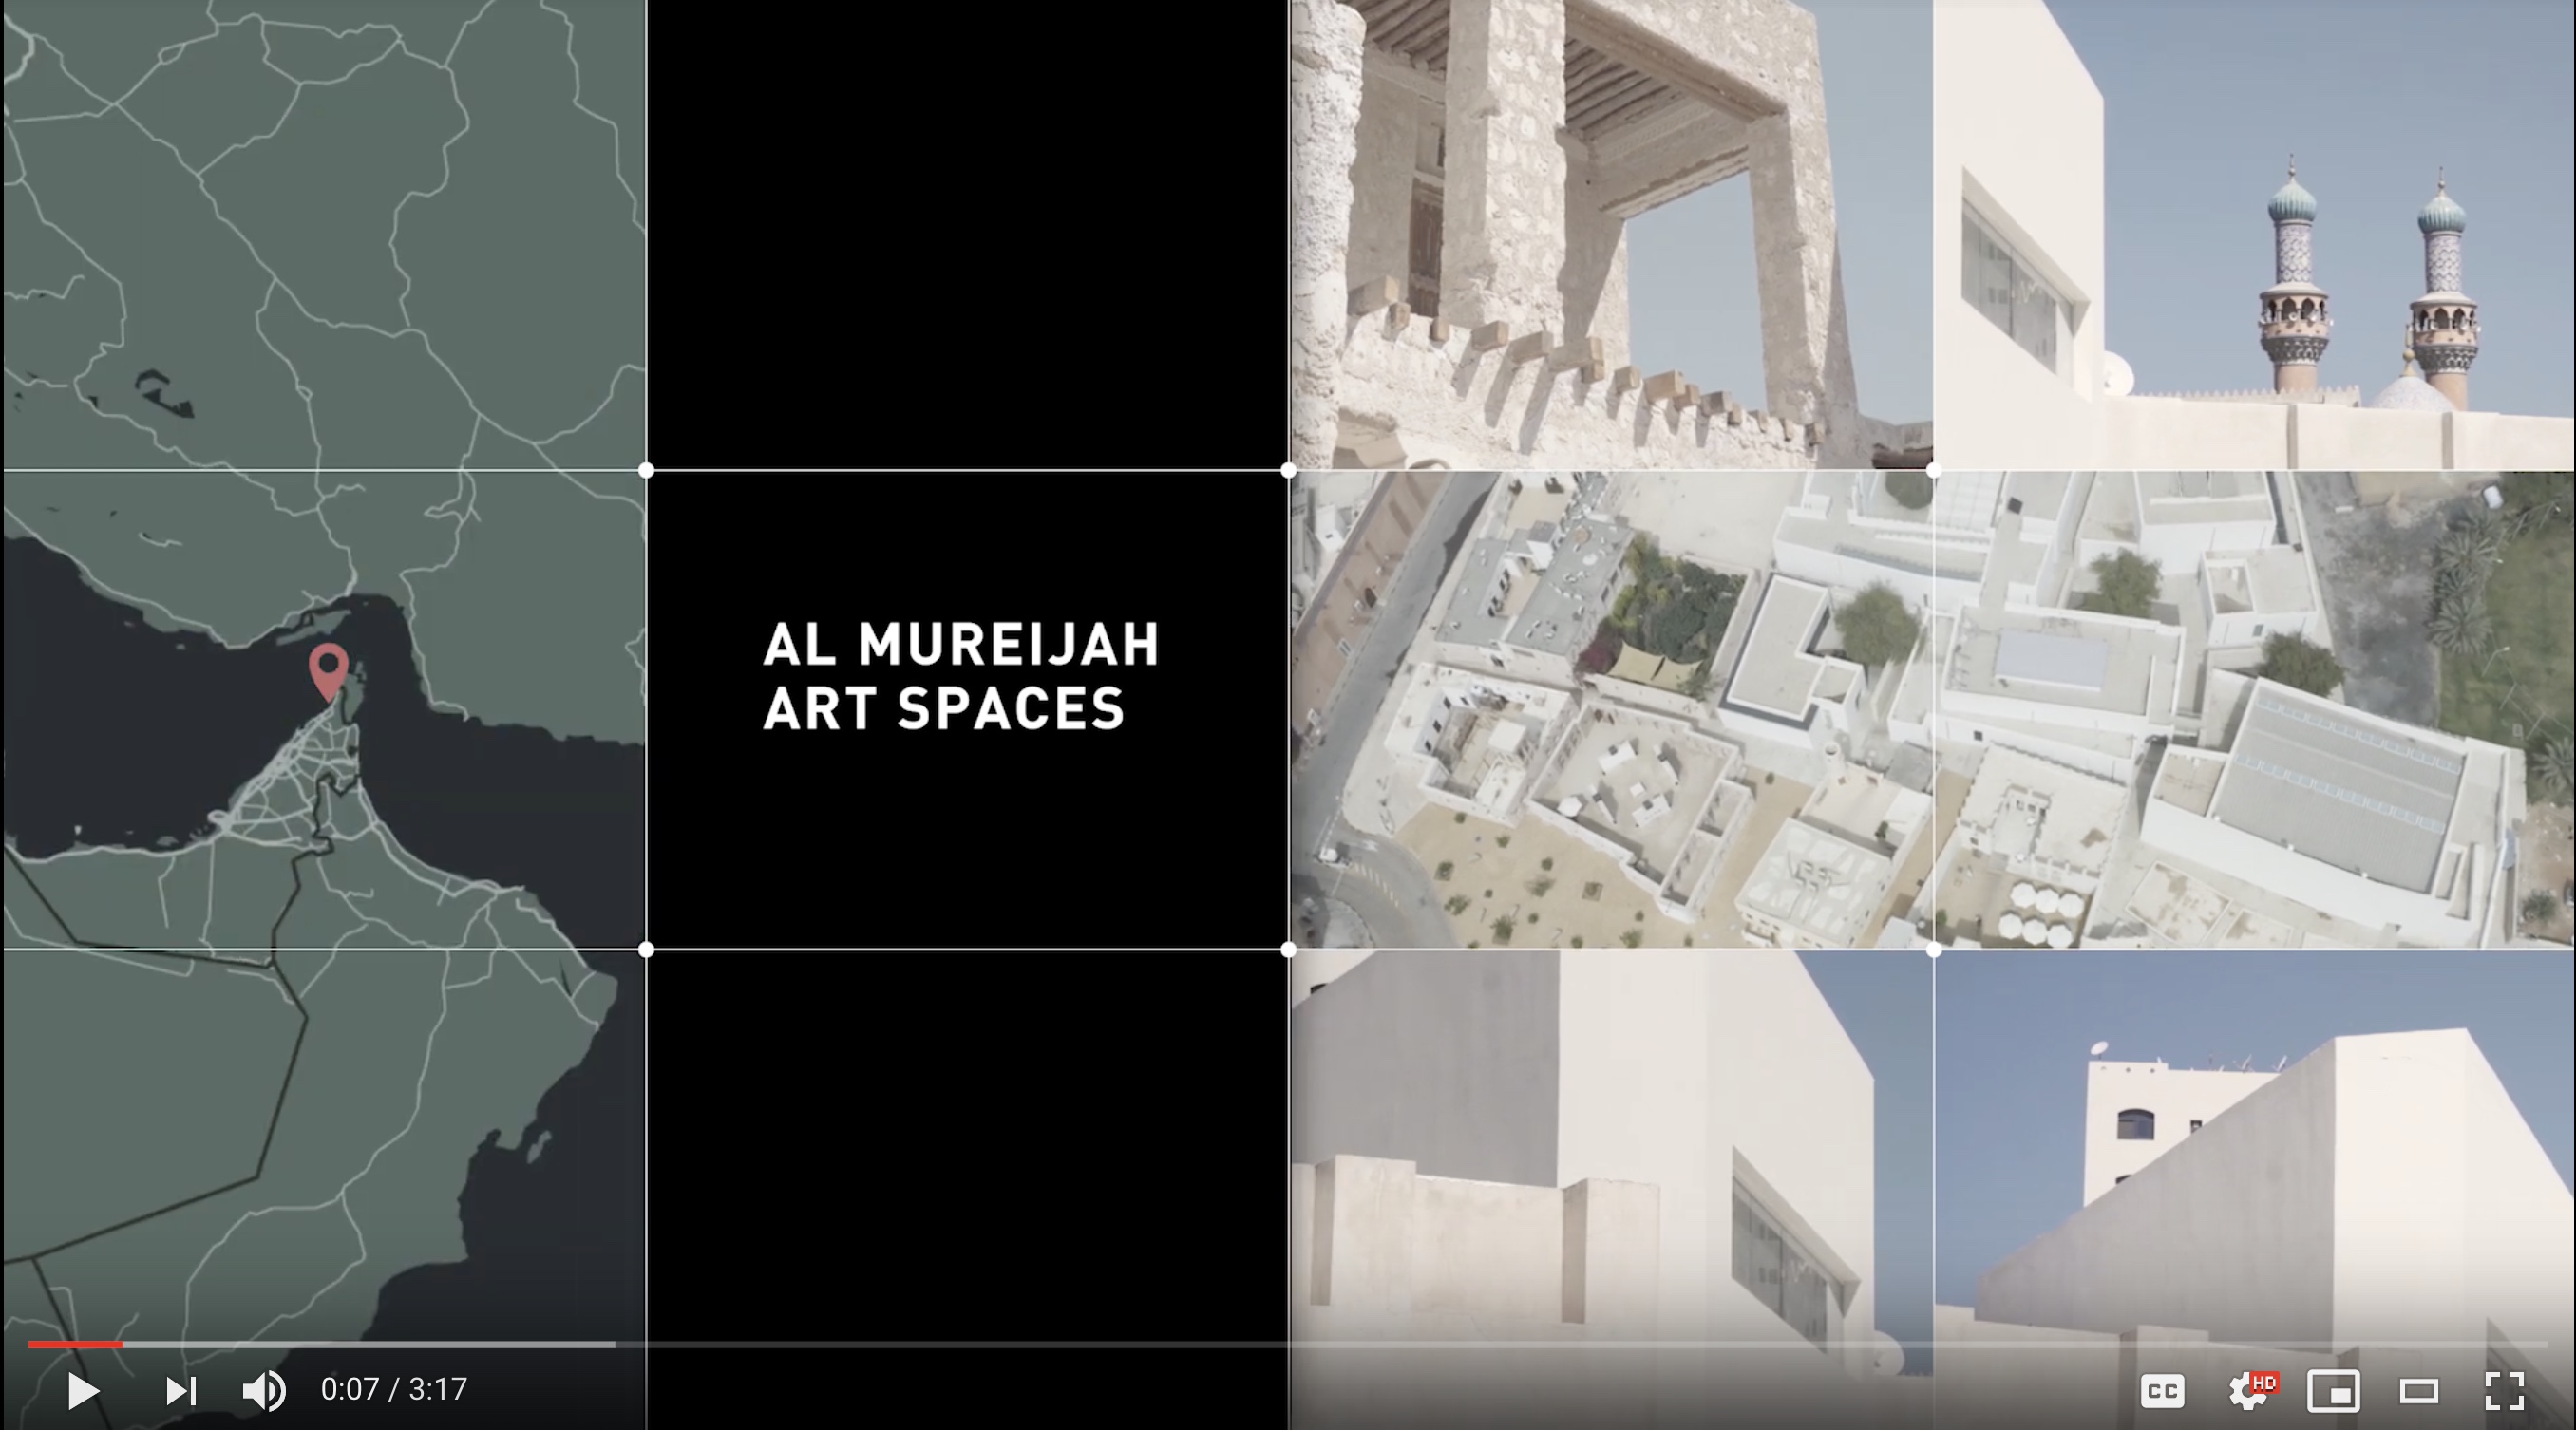 Introduction to the Al Mureijah Art Spaces